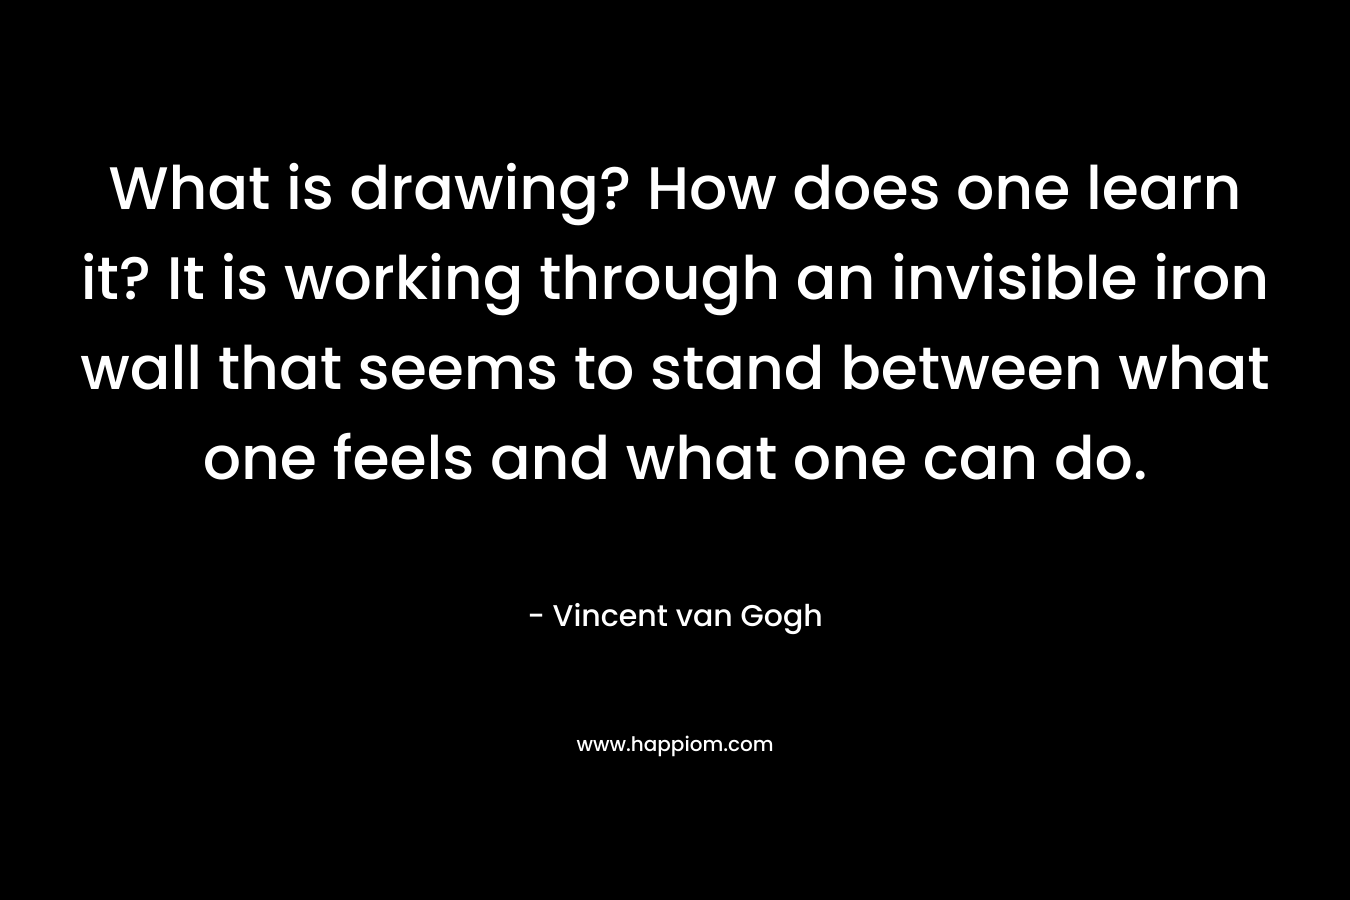 What is drawing? How does one learn it? It is working through an invisible iron wall that seems to stand between what one feels and what one can do.